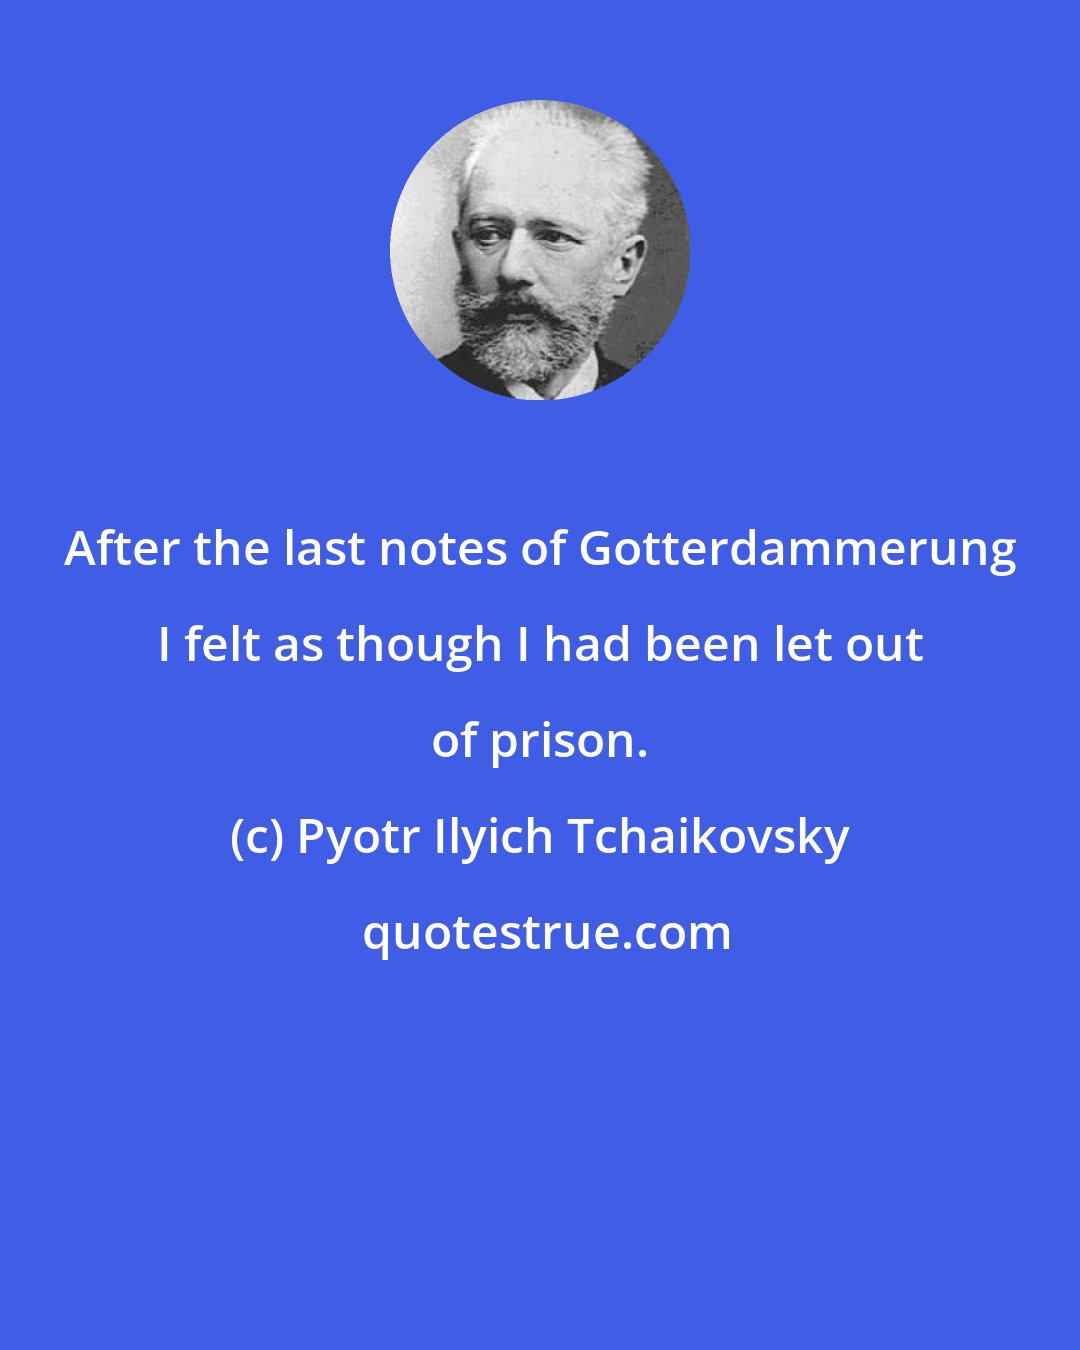 Pyotr Ilyich Tchaikovsky: After the last notes of Gotterdammerung I felt as though I had been let out of prison.